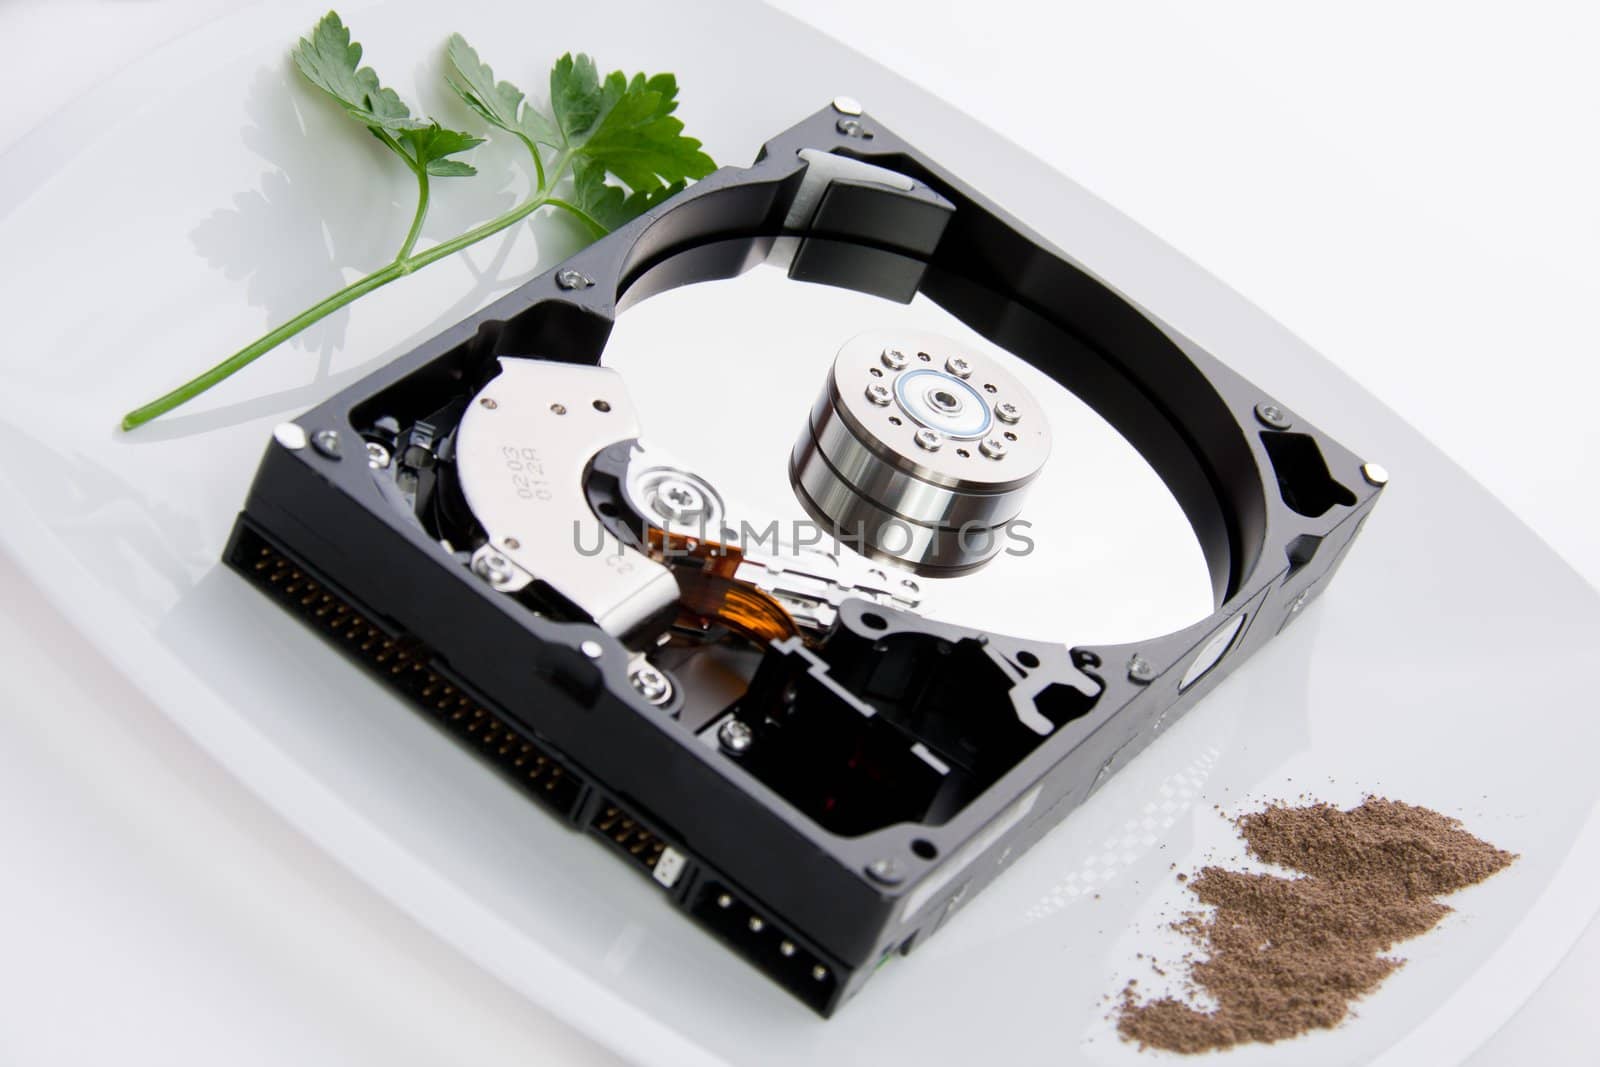 hard drive on the dining plate with seasoning and herbs